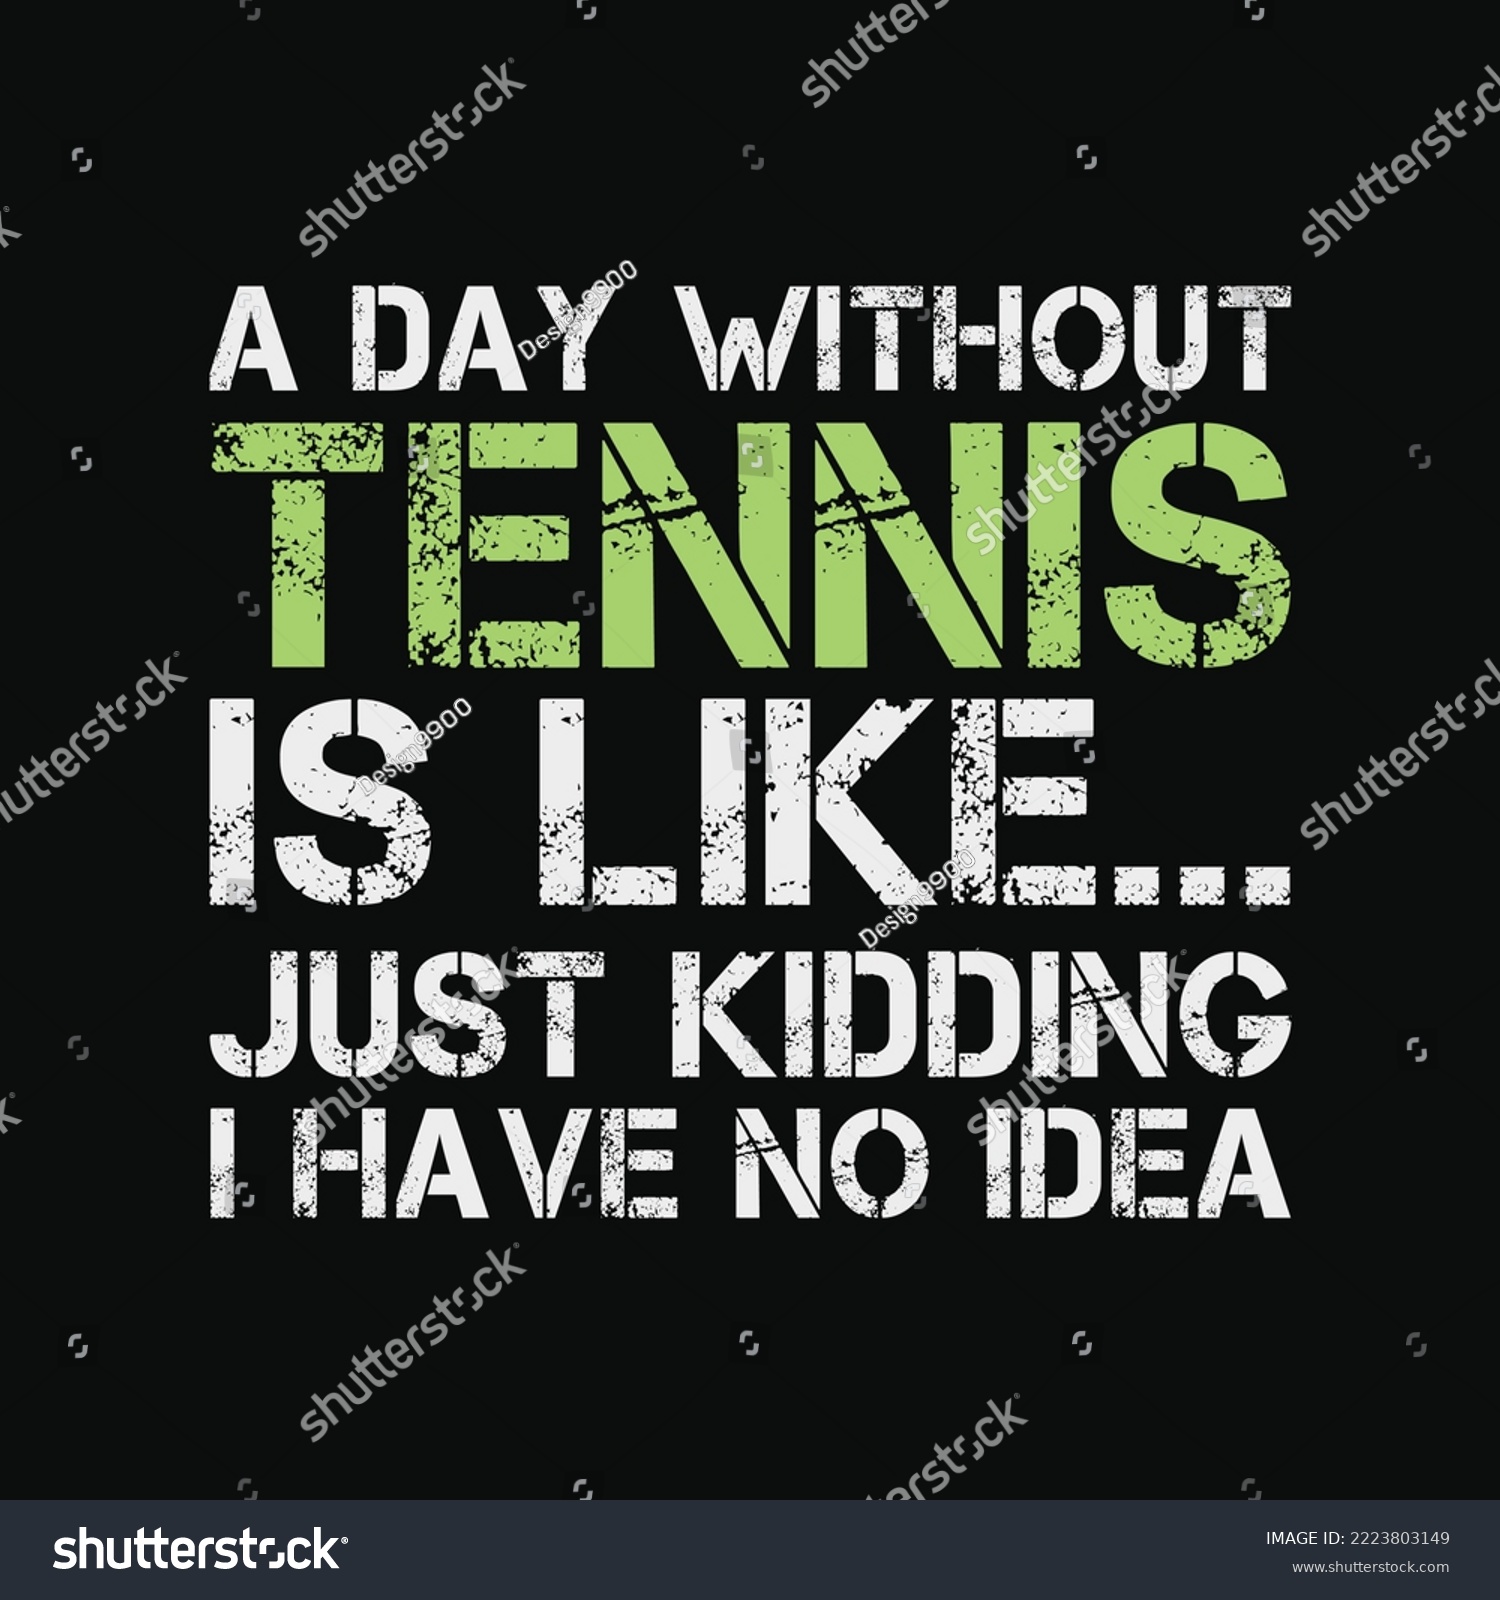 SVG of Funny Tennis designs A Day Without Tennis svg png cricut cutting files svg